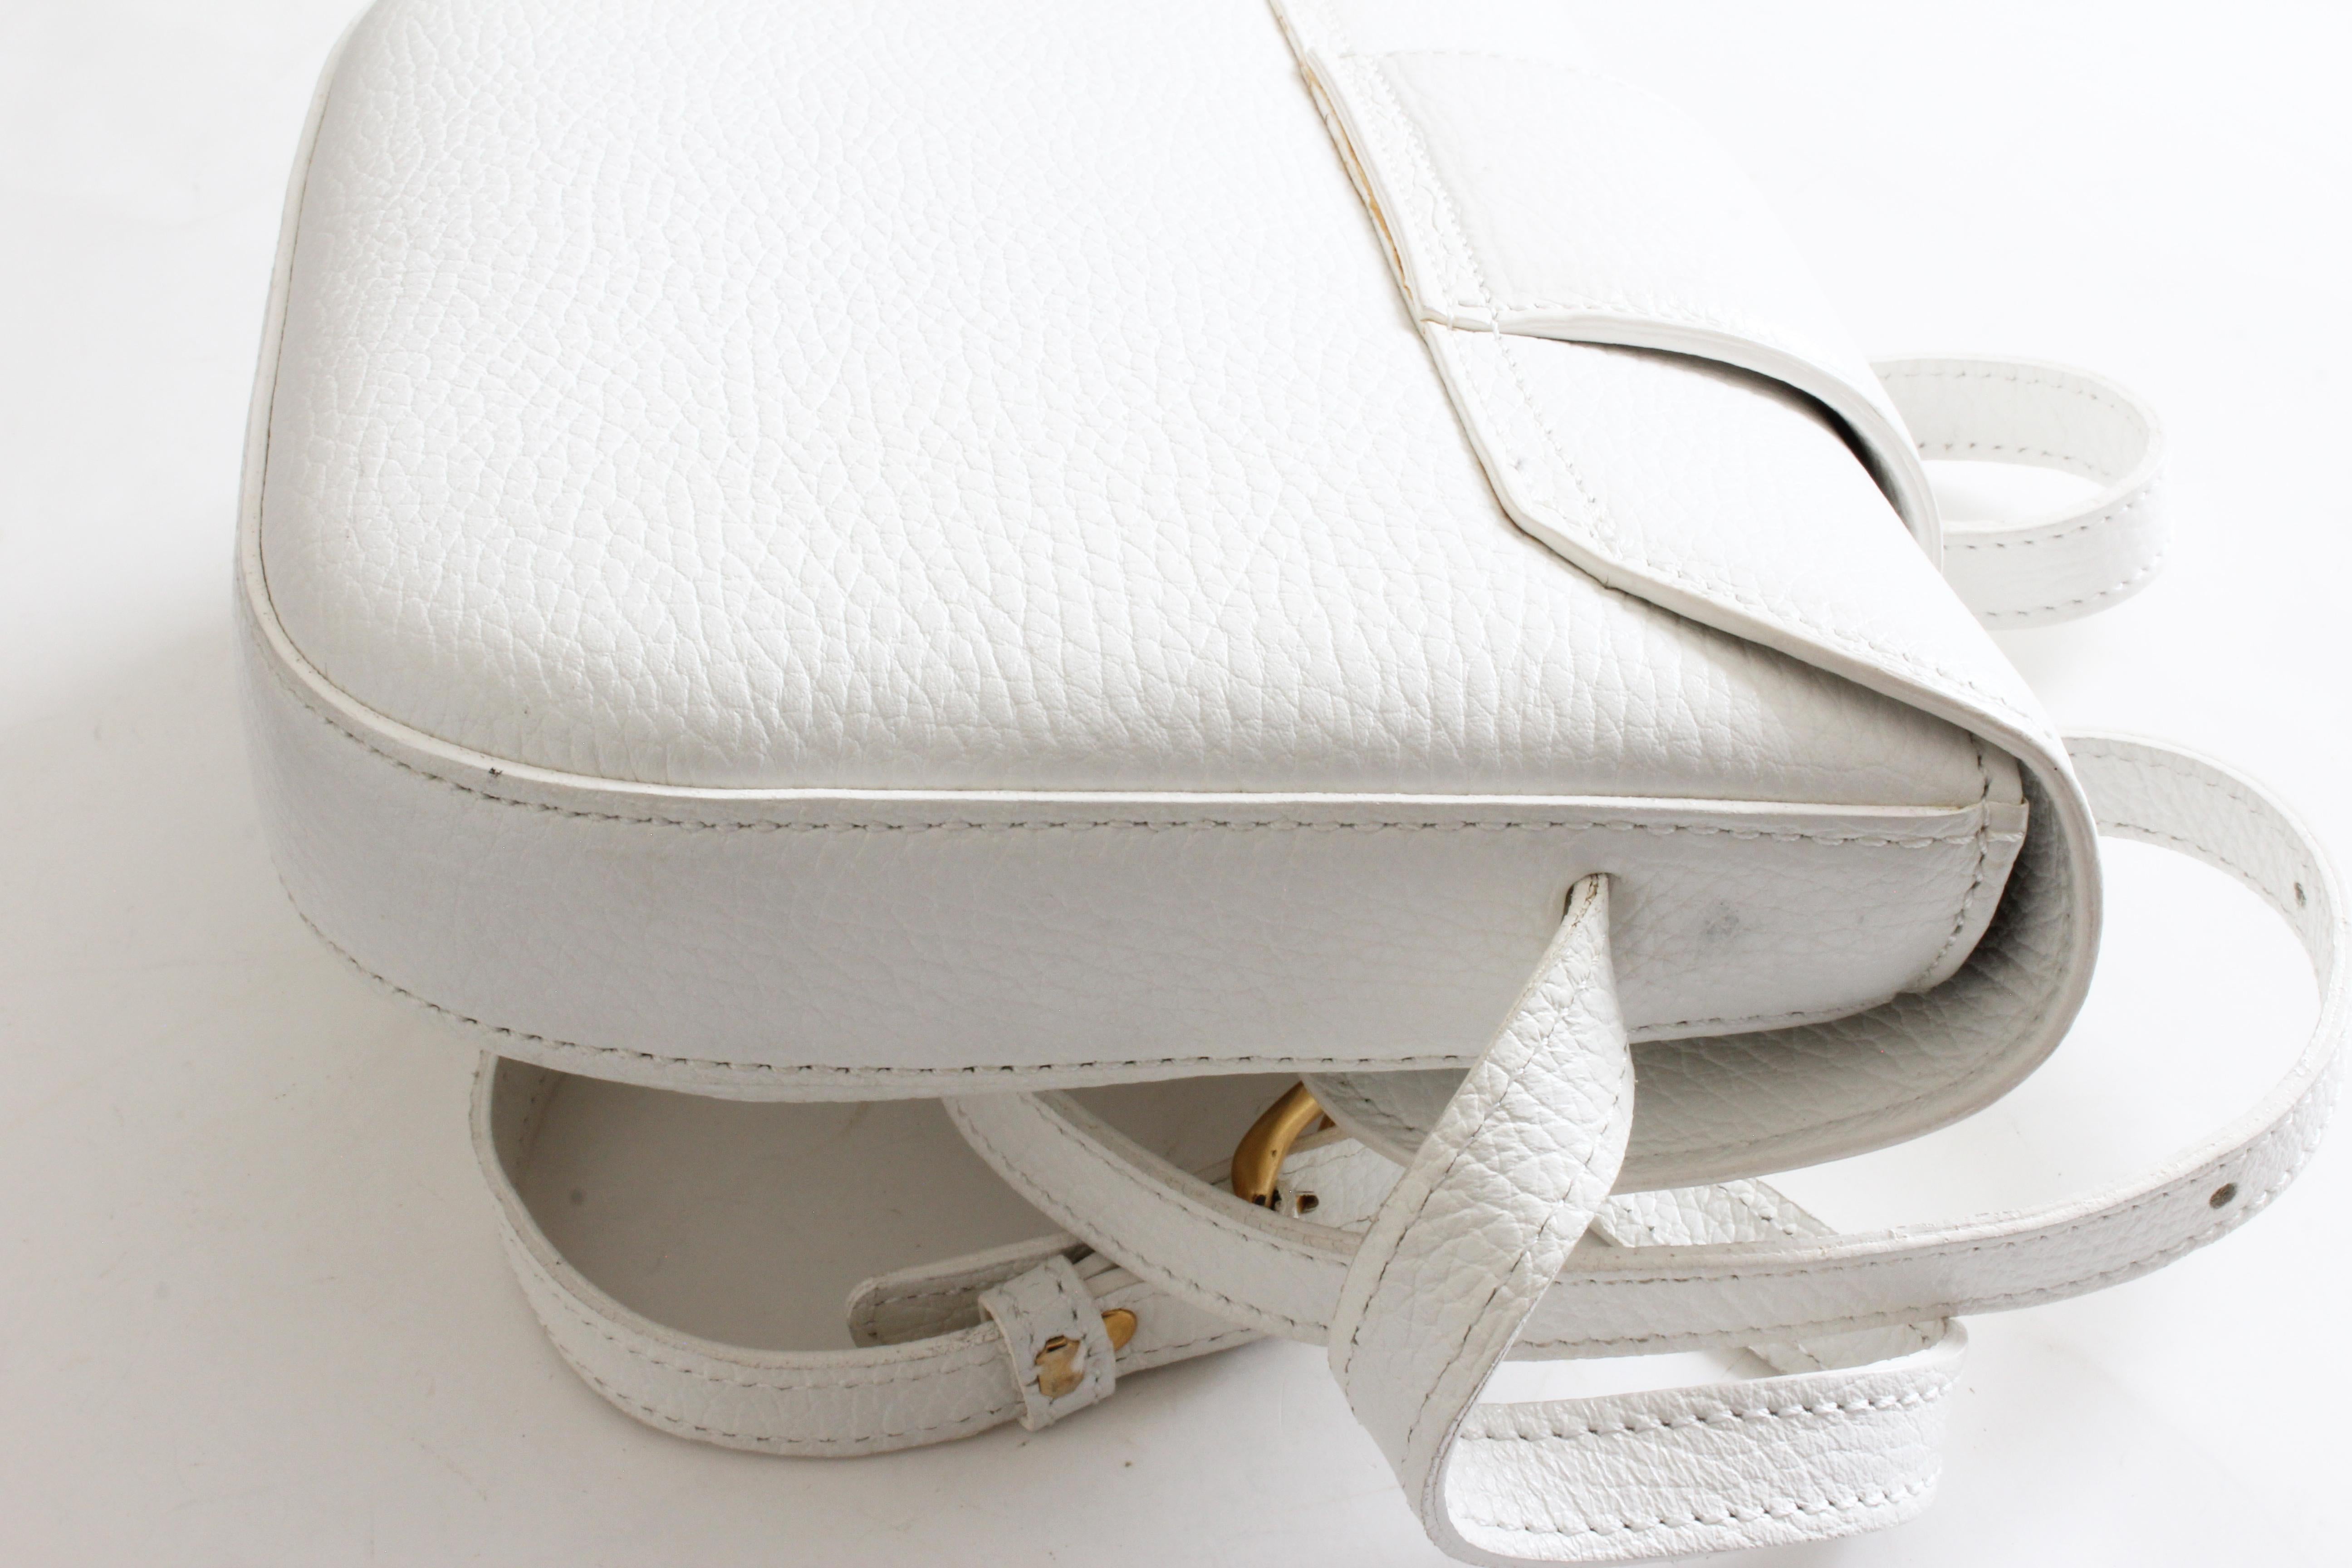 Bally Crossbody Bag White Pebbled Leather Top Flap Shoulder Bag Italy 4